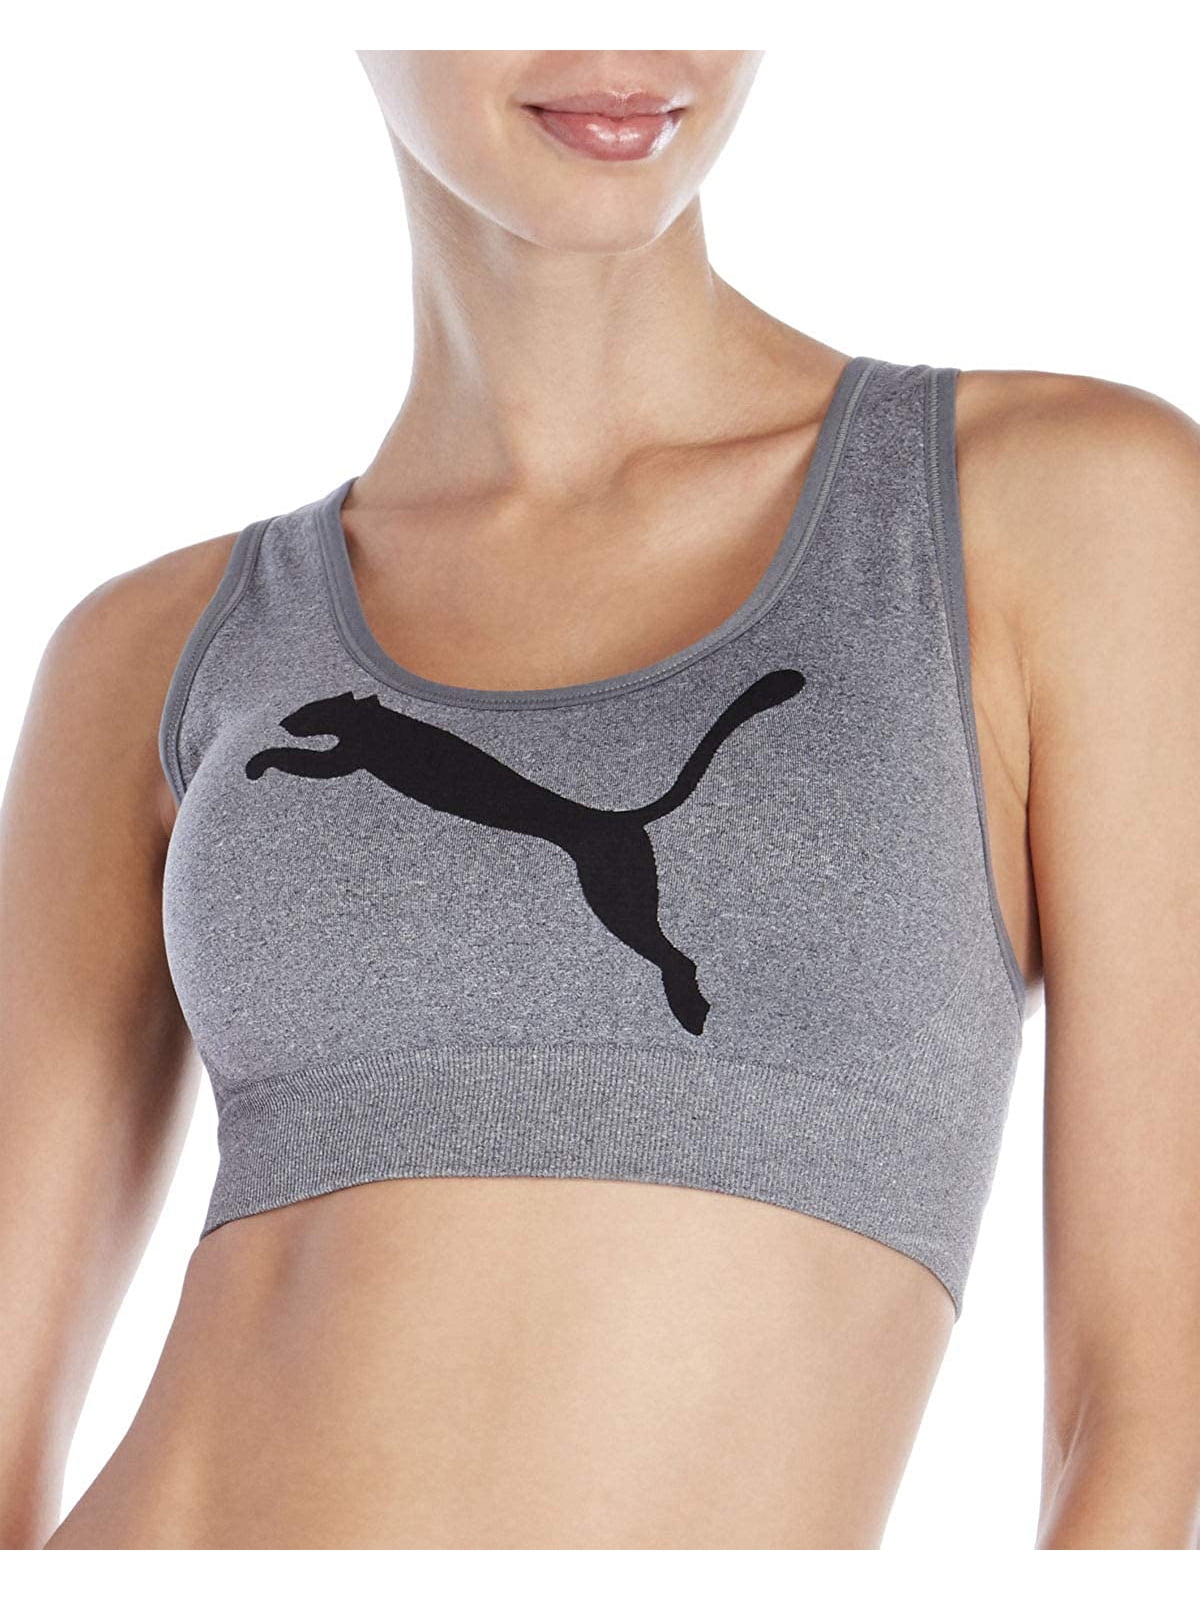 Puma Seamless Crossback Sports Bra with Removable Cups & Graphic